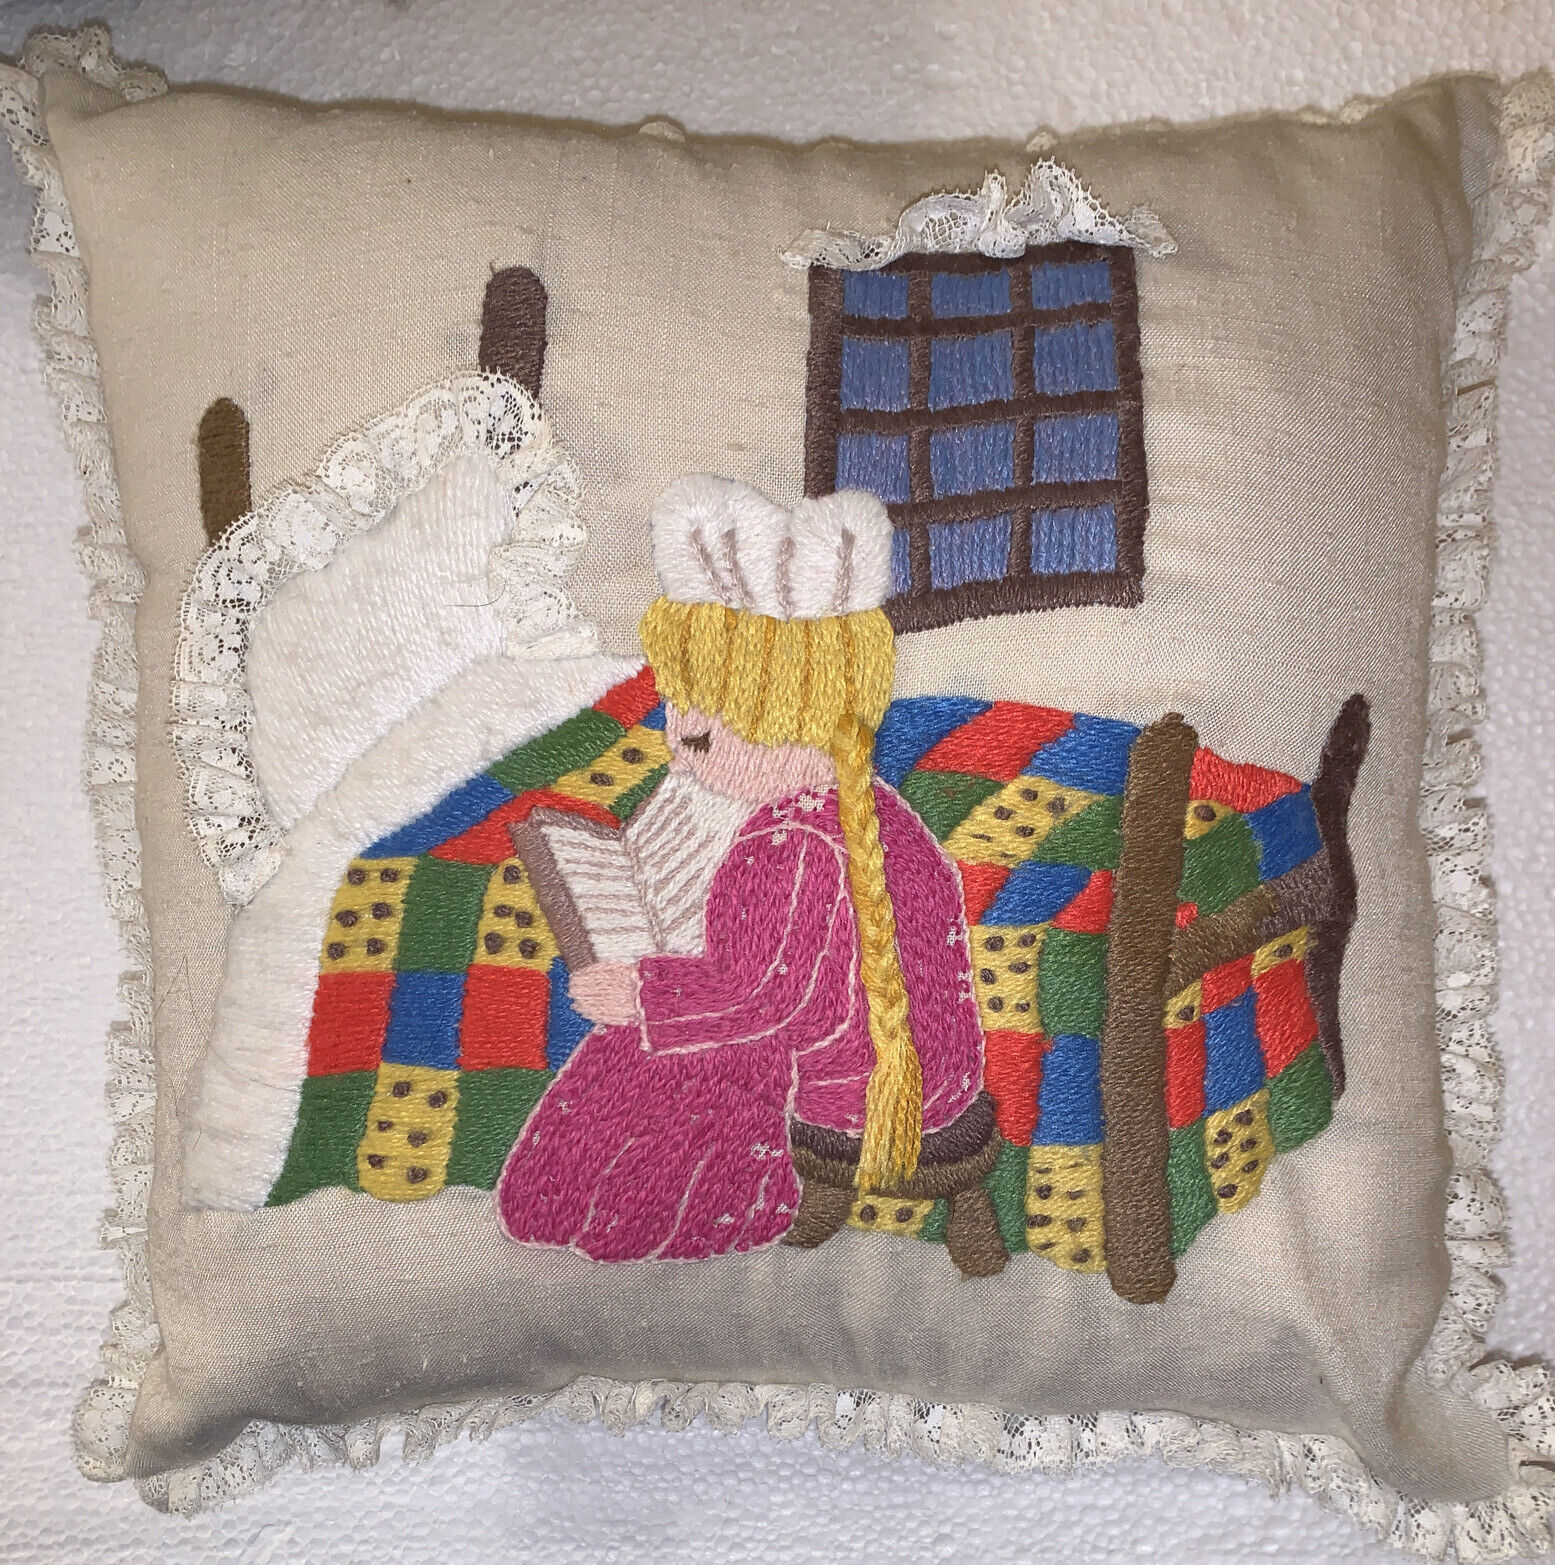 Vintage Homemade Embroidered Pillow Girl reading Book beside her Bed